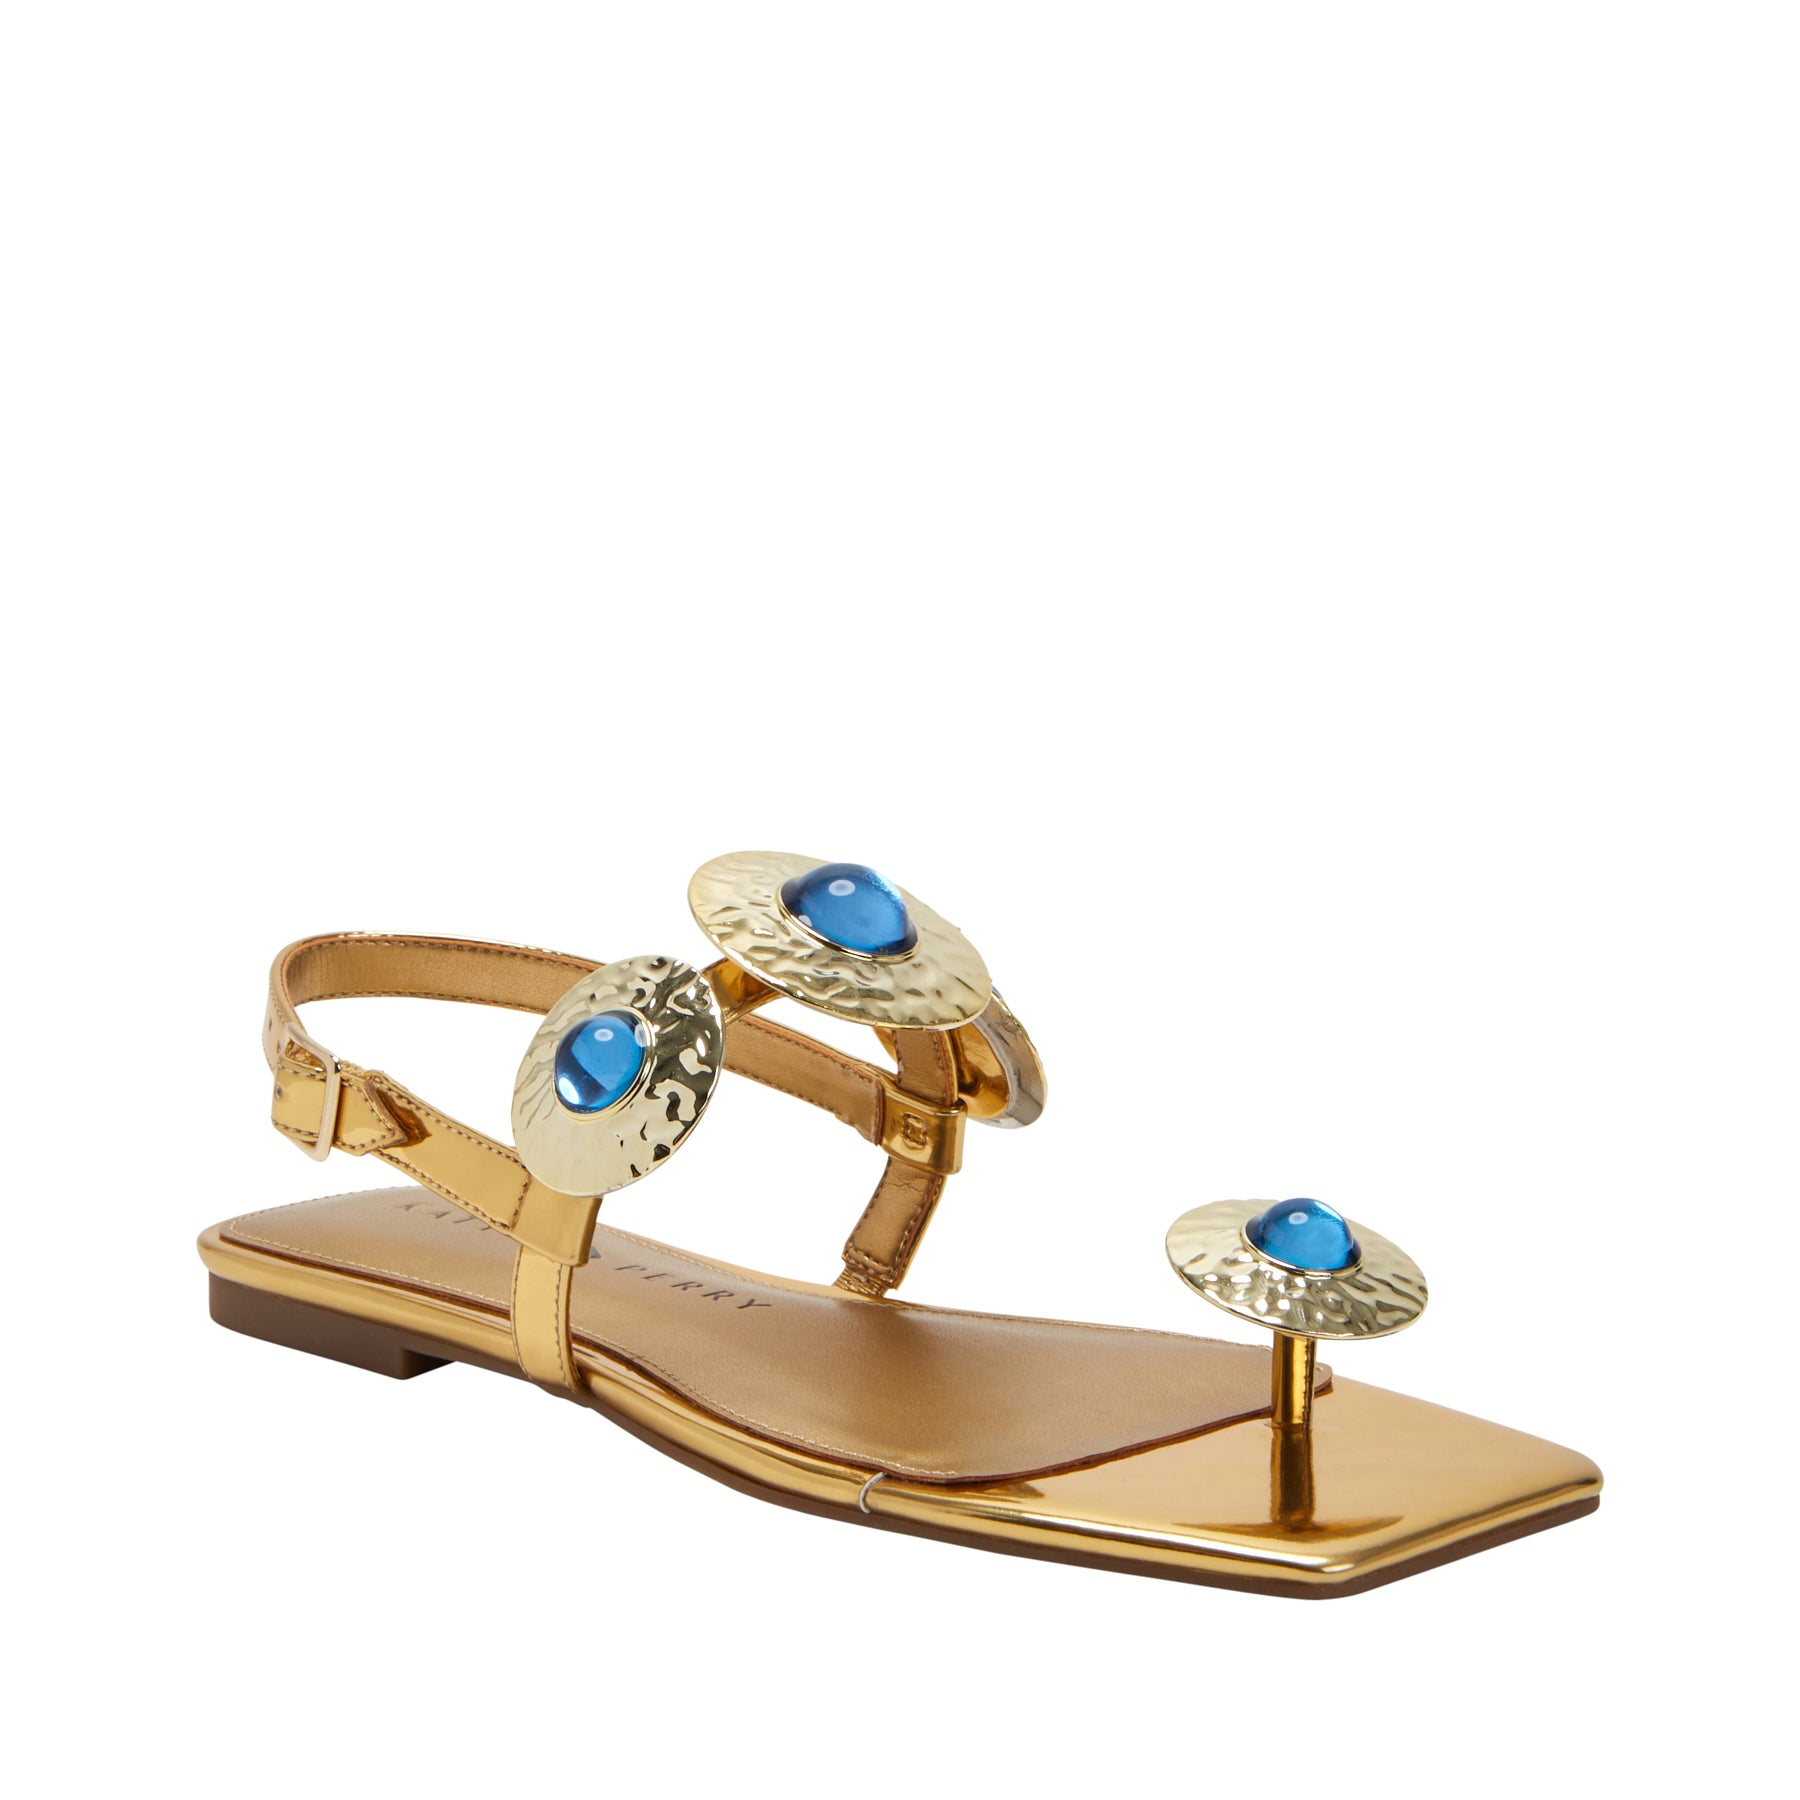 THE CAMIE STONE SANDAL – Katy Perry Collections